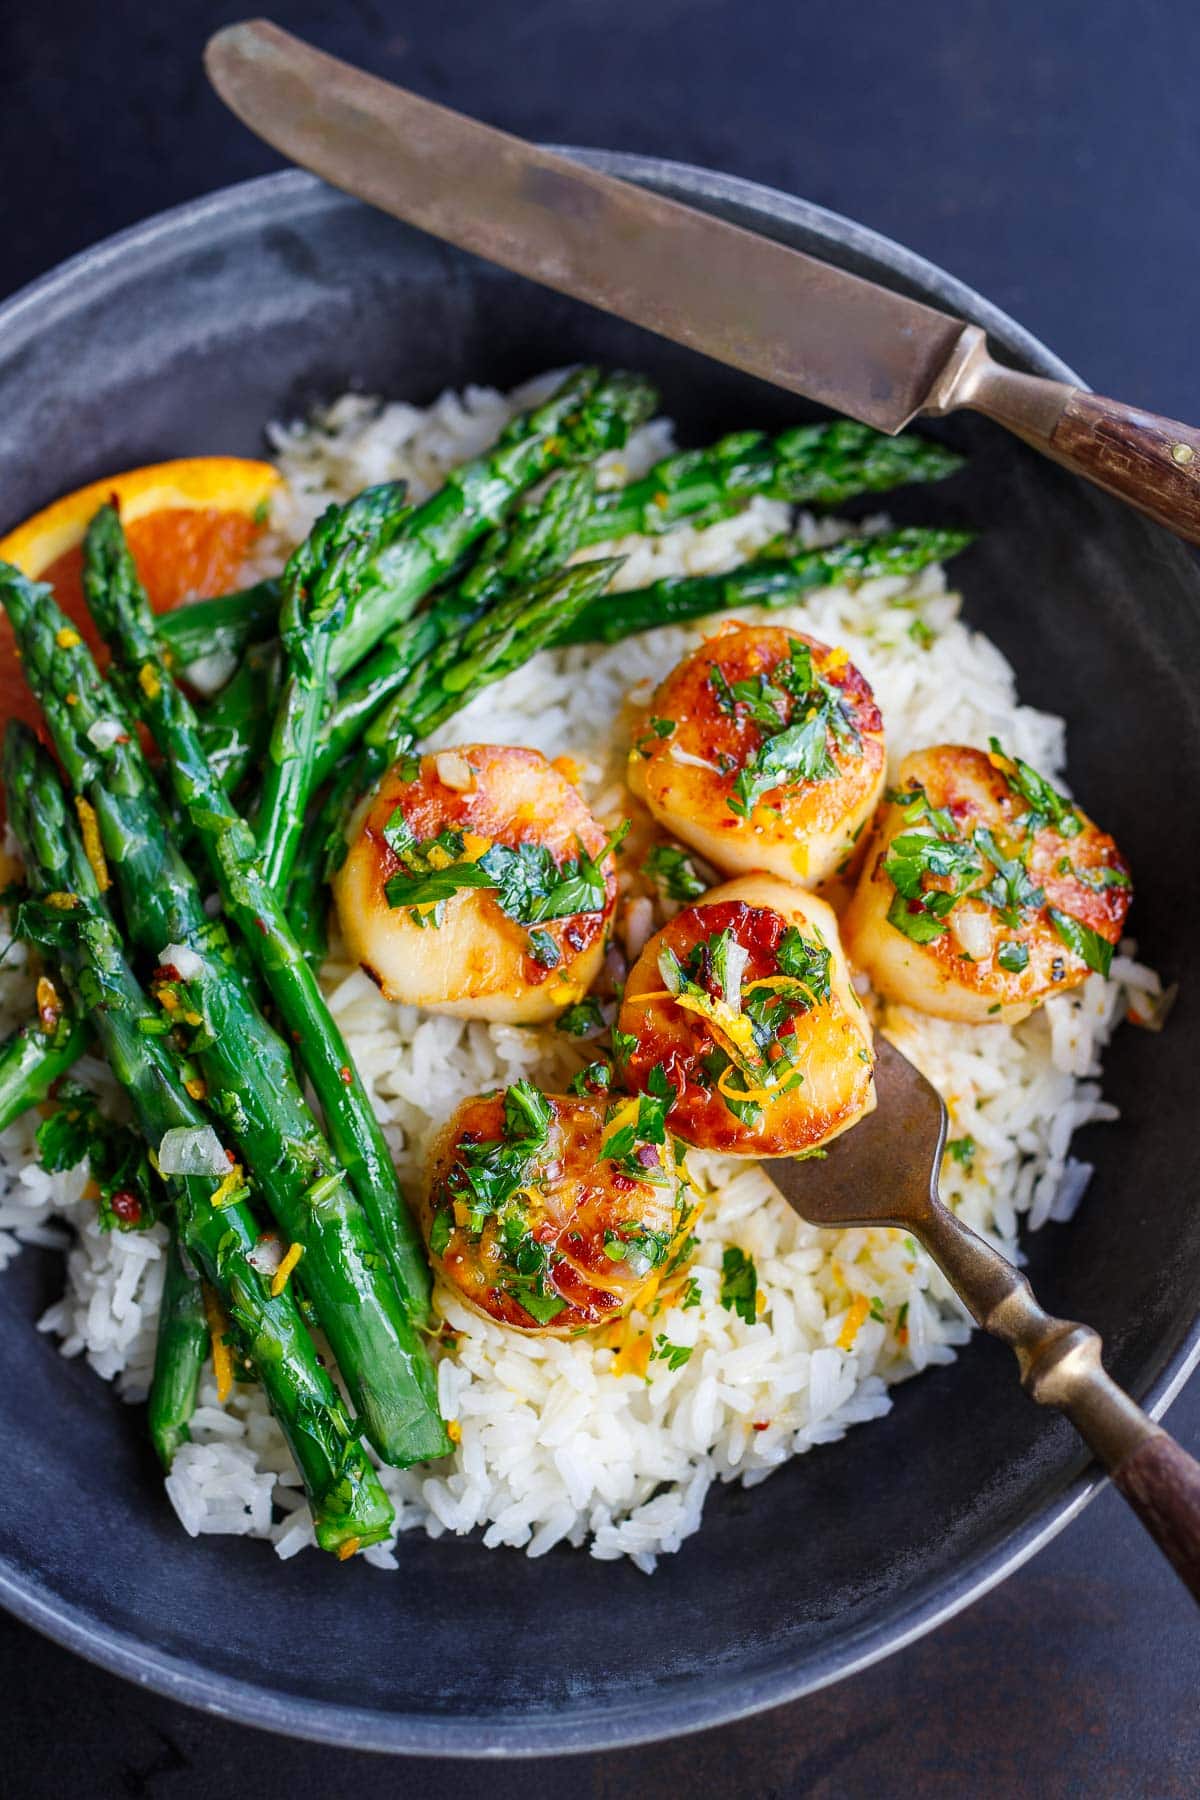 seared scallops in citrus dressing served over rice with asparagus and orange slice.